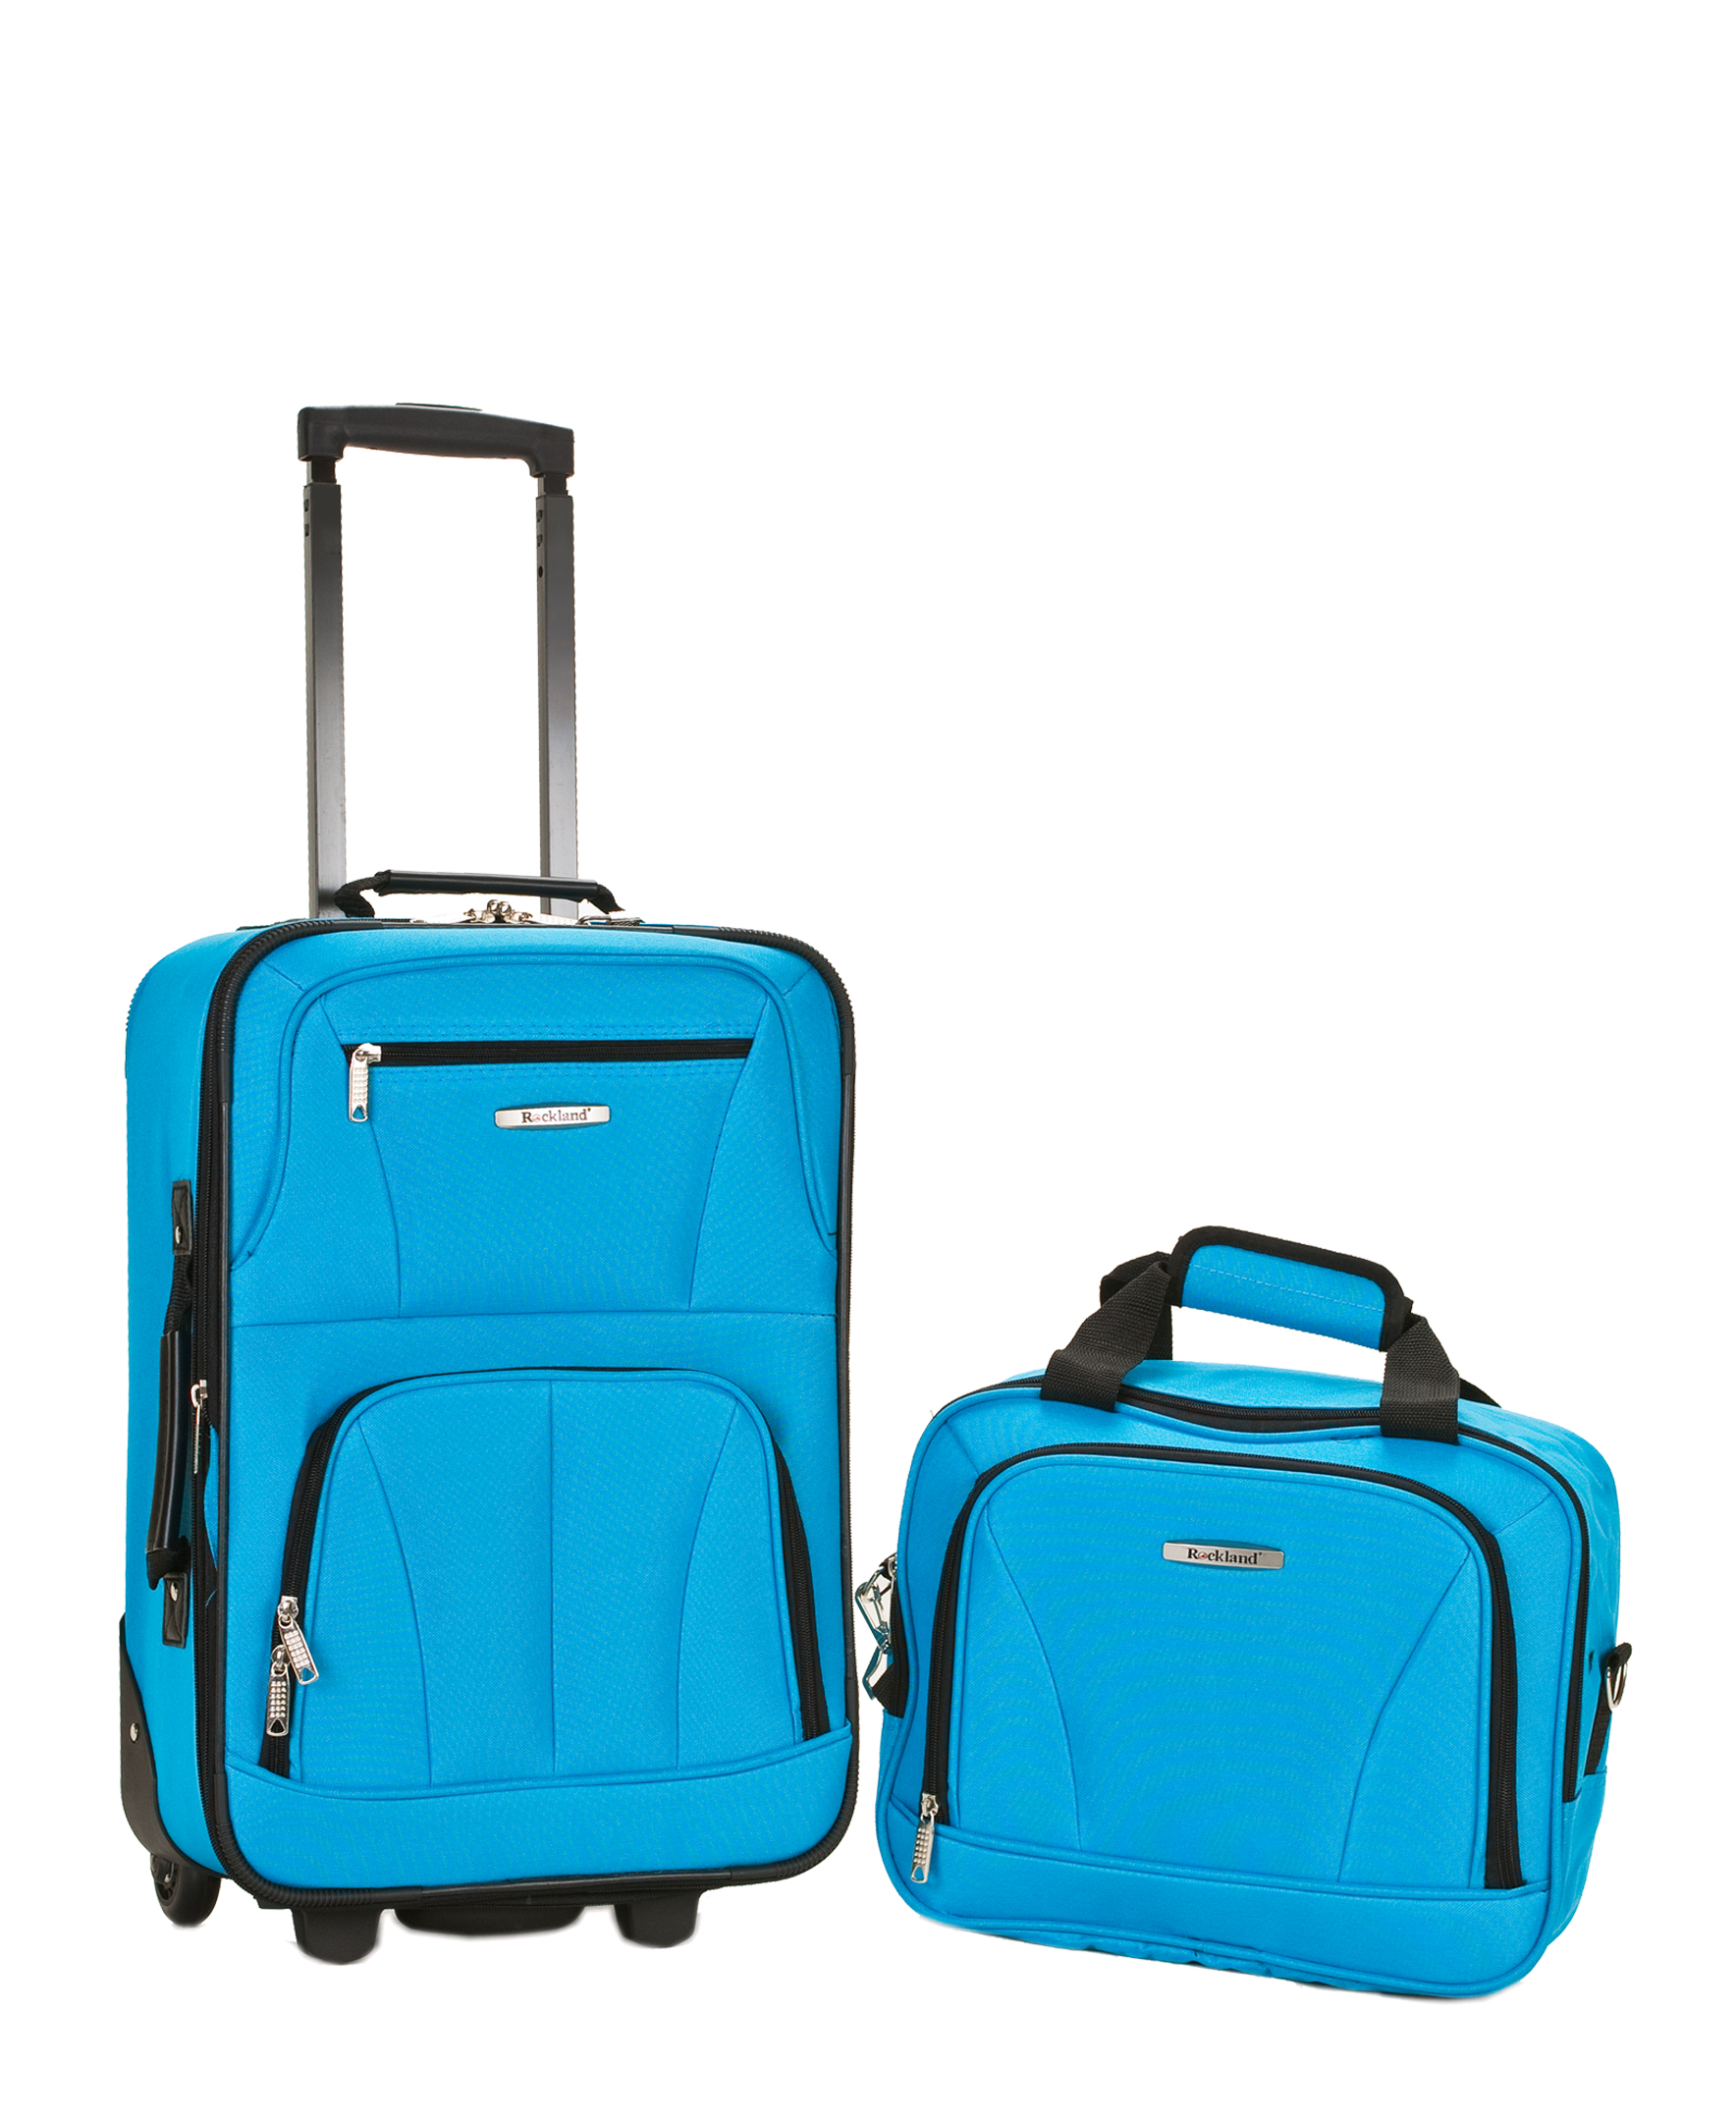 Rockland Expandable Carry On Luggage Set-Color:Turquoise,Number of Items:2 Piece - image 1 of 2